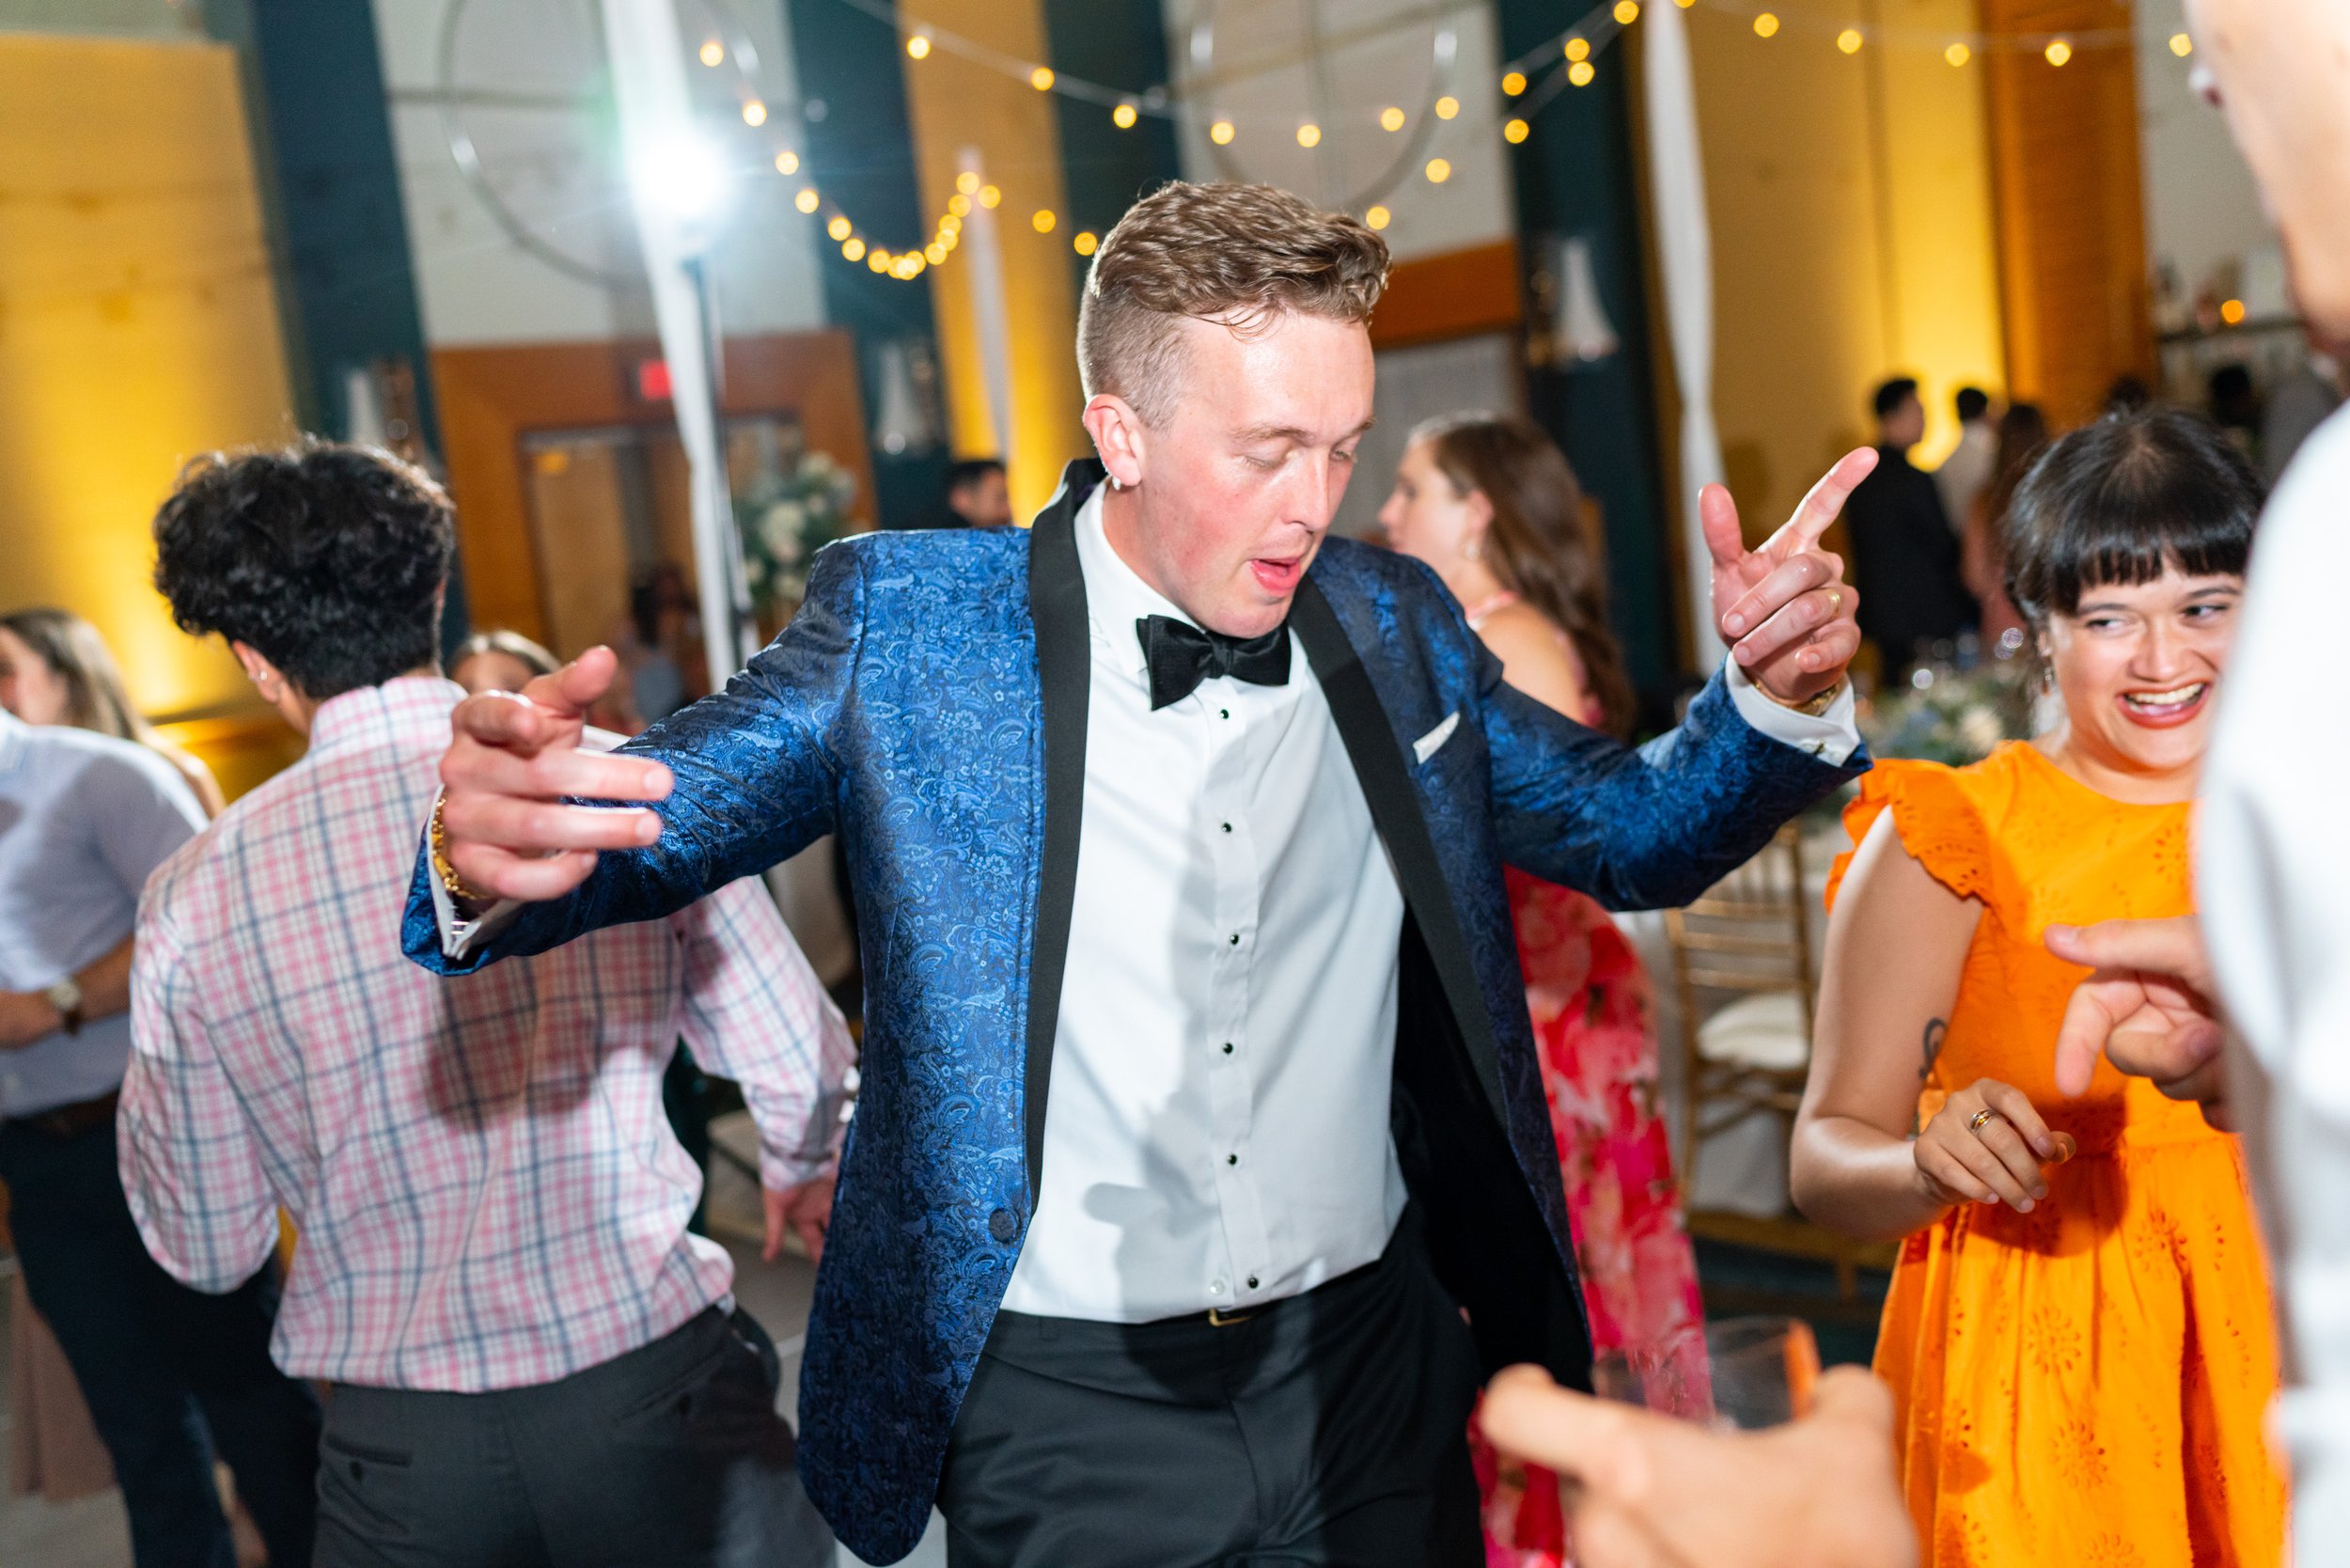 fun and colorful wedding photos of guests on the dance floor